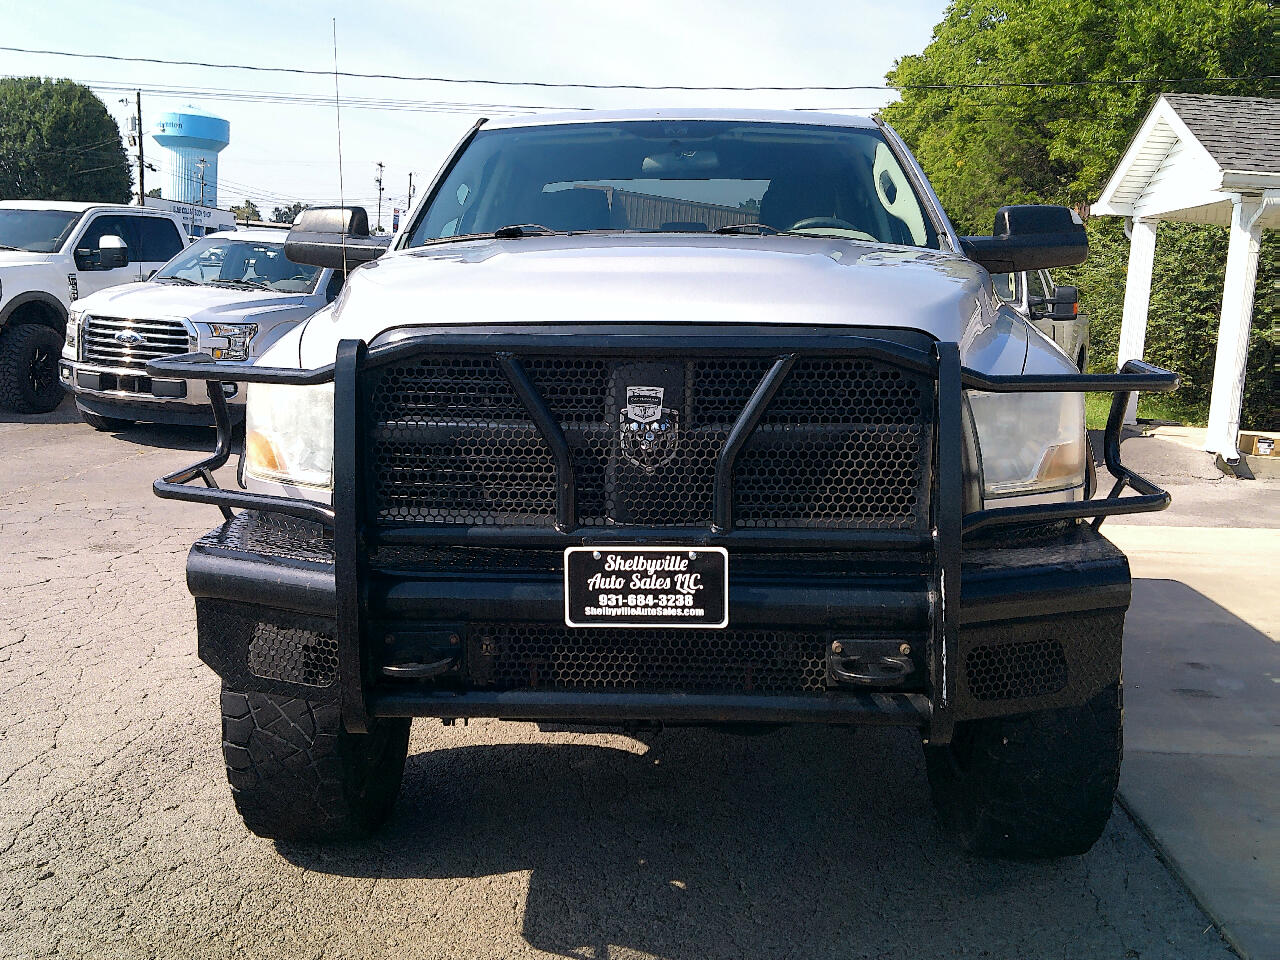 2012 RAM 2500 CHECK IT OUT4WDLIKE NEW TIRESSTEP BARS1 OWNER CLEAN CARFAXEXHAUST BR